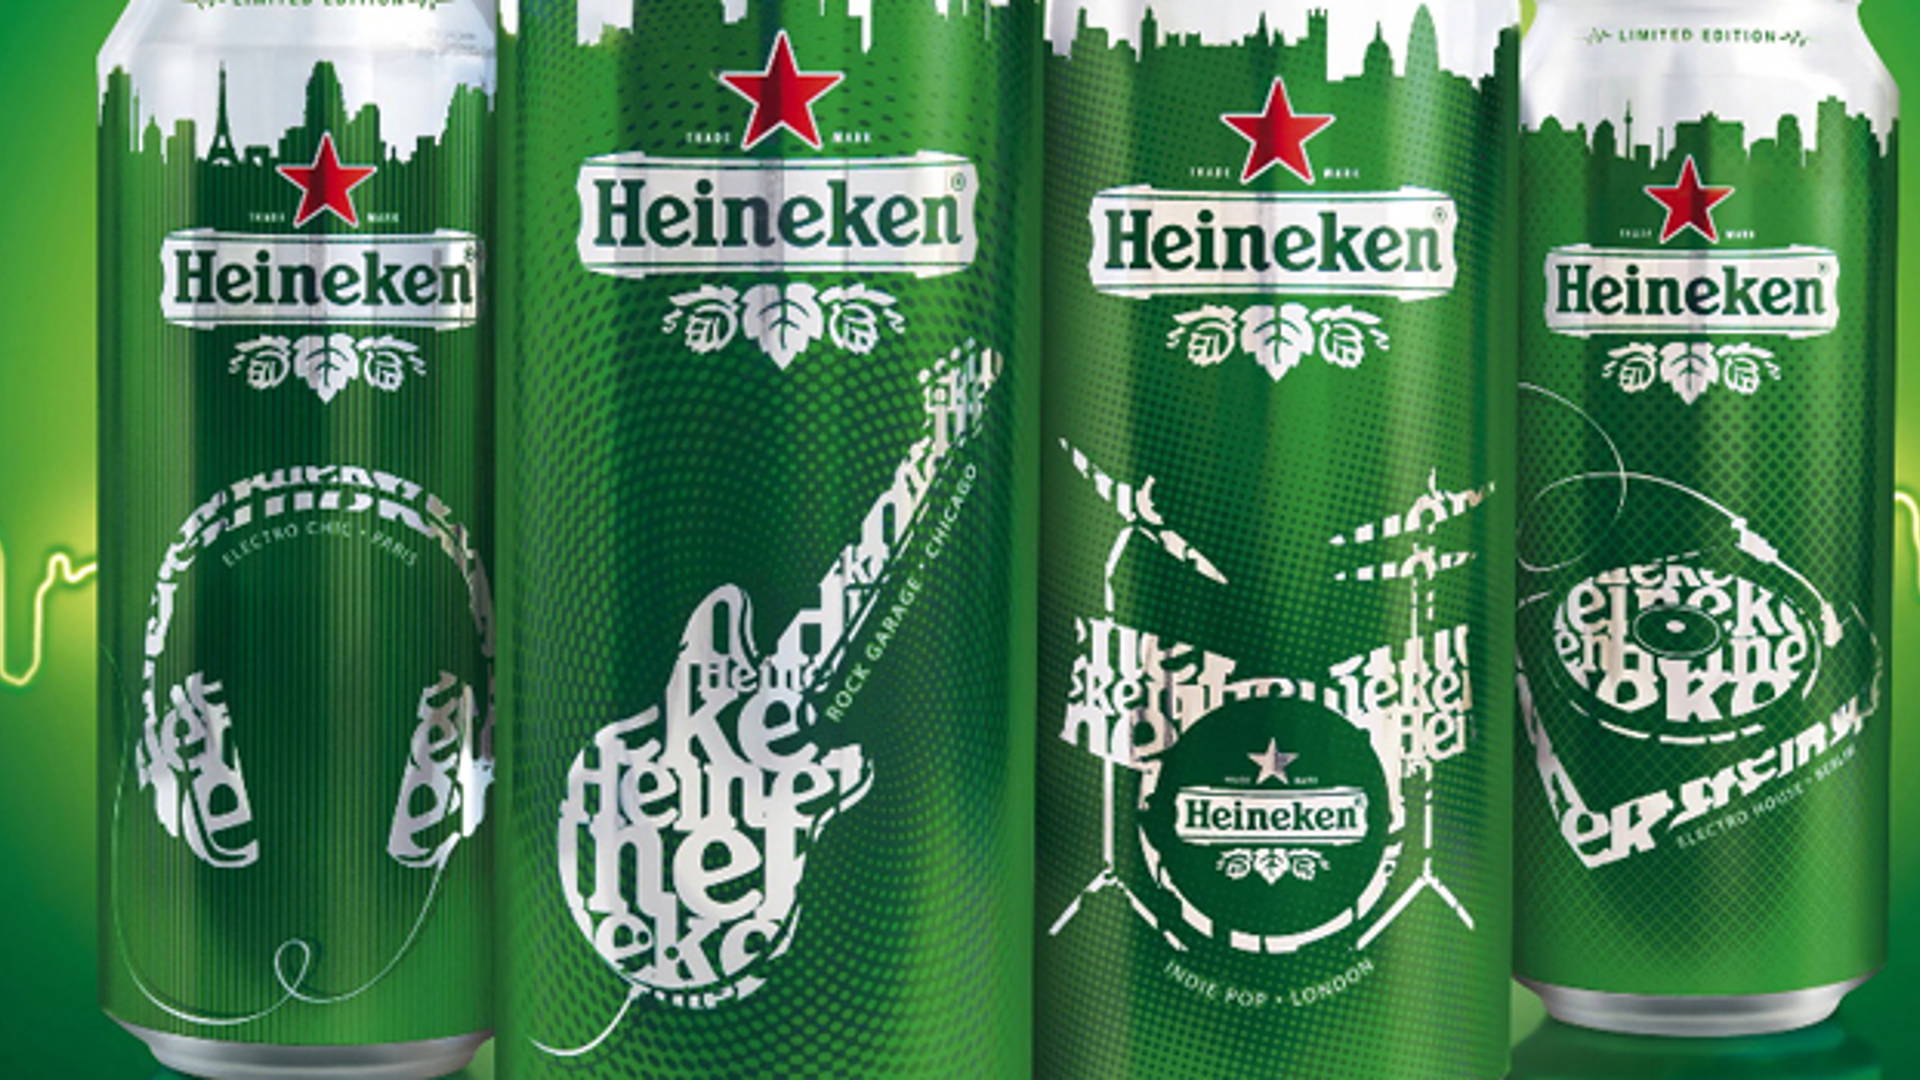 Featured image for Heineken: Limited Edition